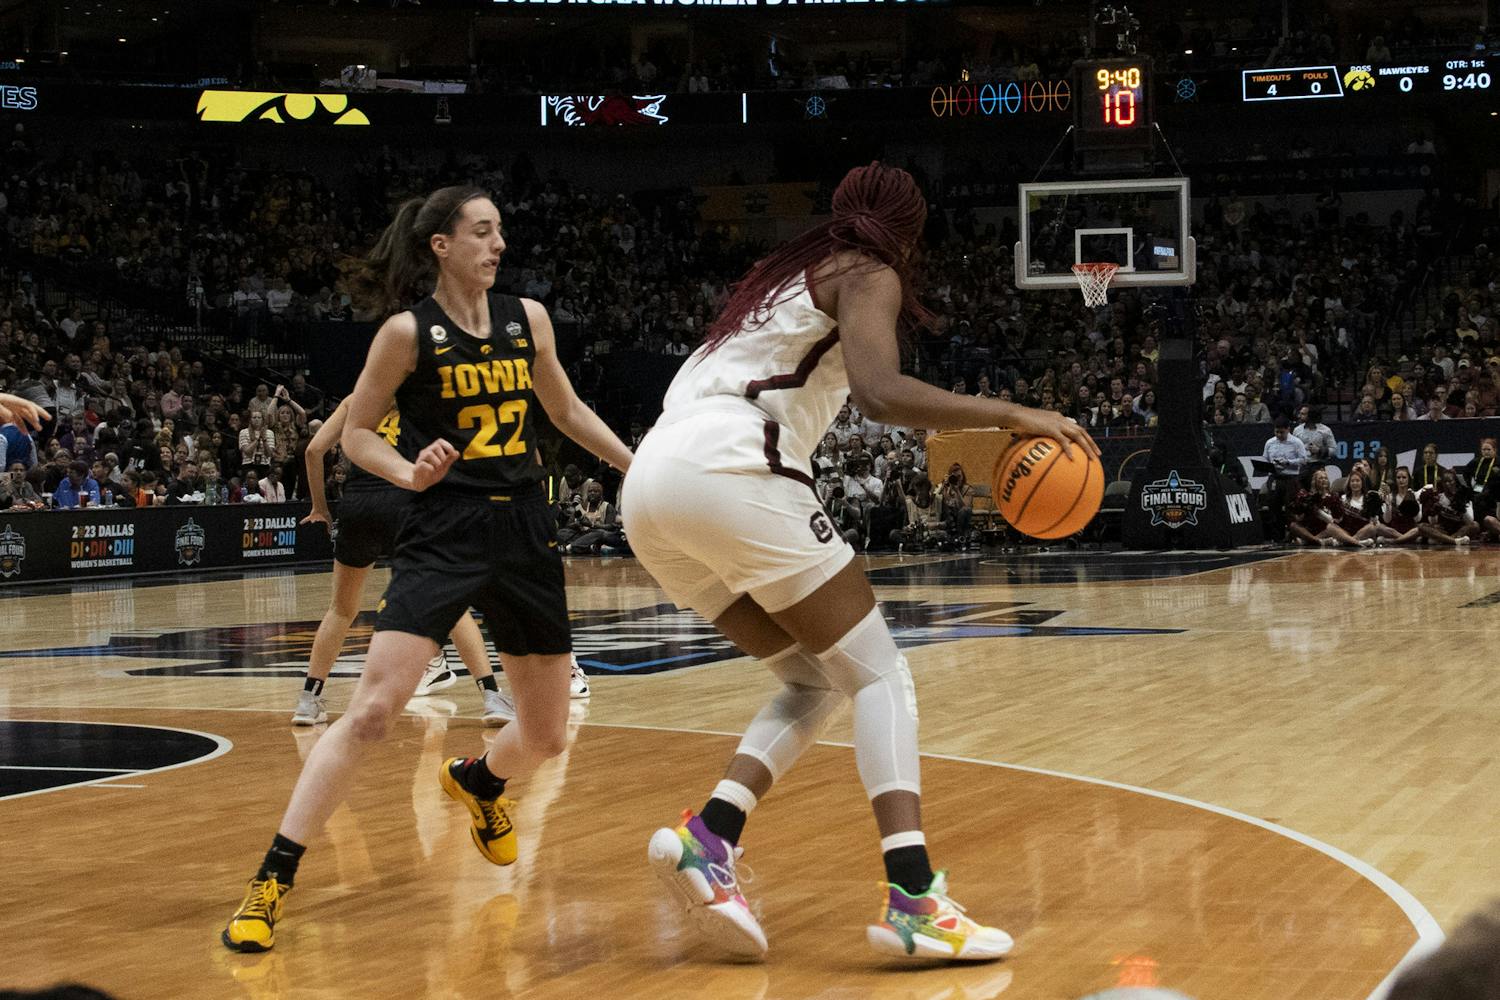 Senior forward Aliyah Boston back towards the paint against Iowa junior guard Caitlin Clark during the Final Four matchup in Dallas, Texas, on March 31, 2023. The game drew a peak audience of 6.6 million viewers with an average of 5.5 million.